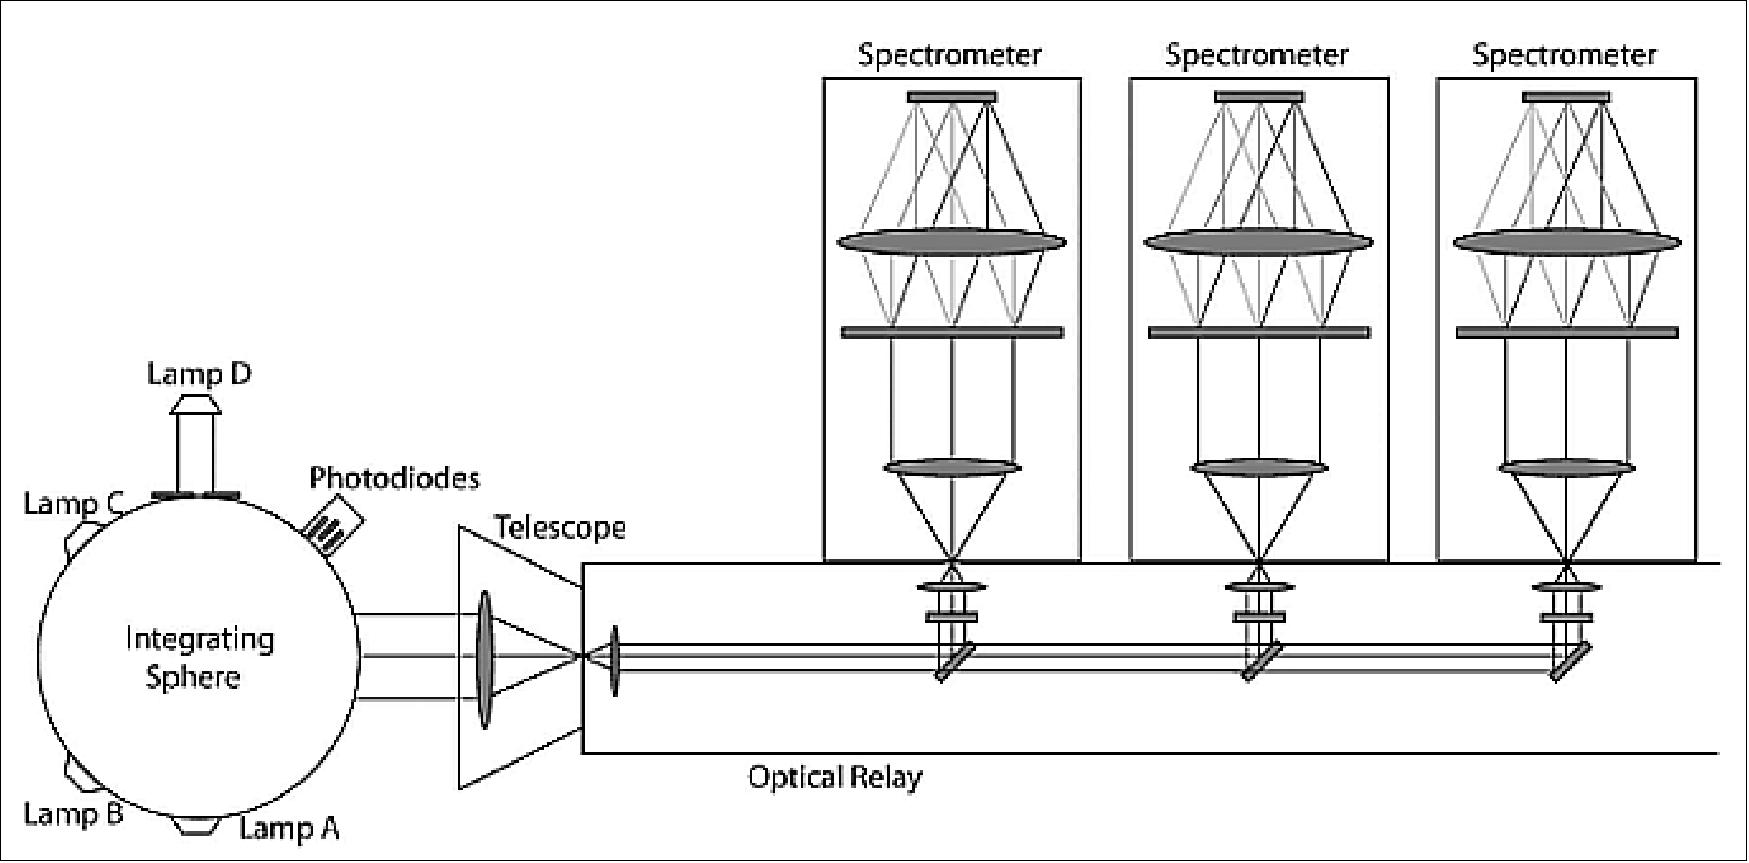 Figure 37: Schematic view of the spectrometer optics chain as well as the integrating sphere for the radiometric ground test. Lamp D is external to the integrating sphere, and its brightness is controlled by an adjustable slit (image credit: NASA/JPL)